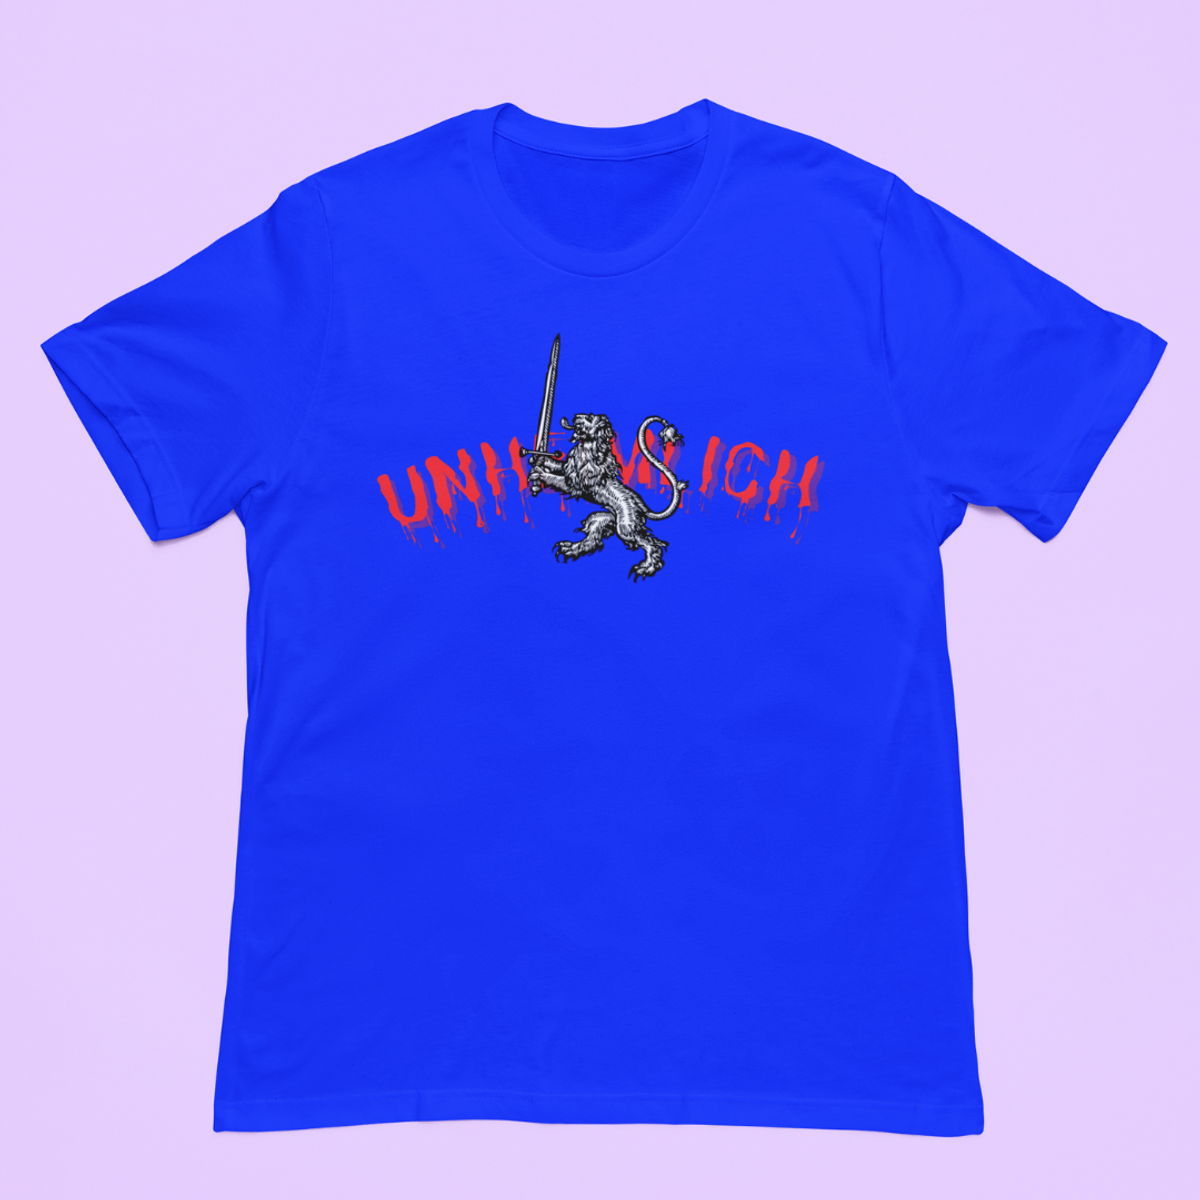 Nome do produto: Camisa unheimlich Bloody Knight S-class (just front)